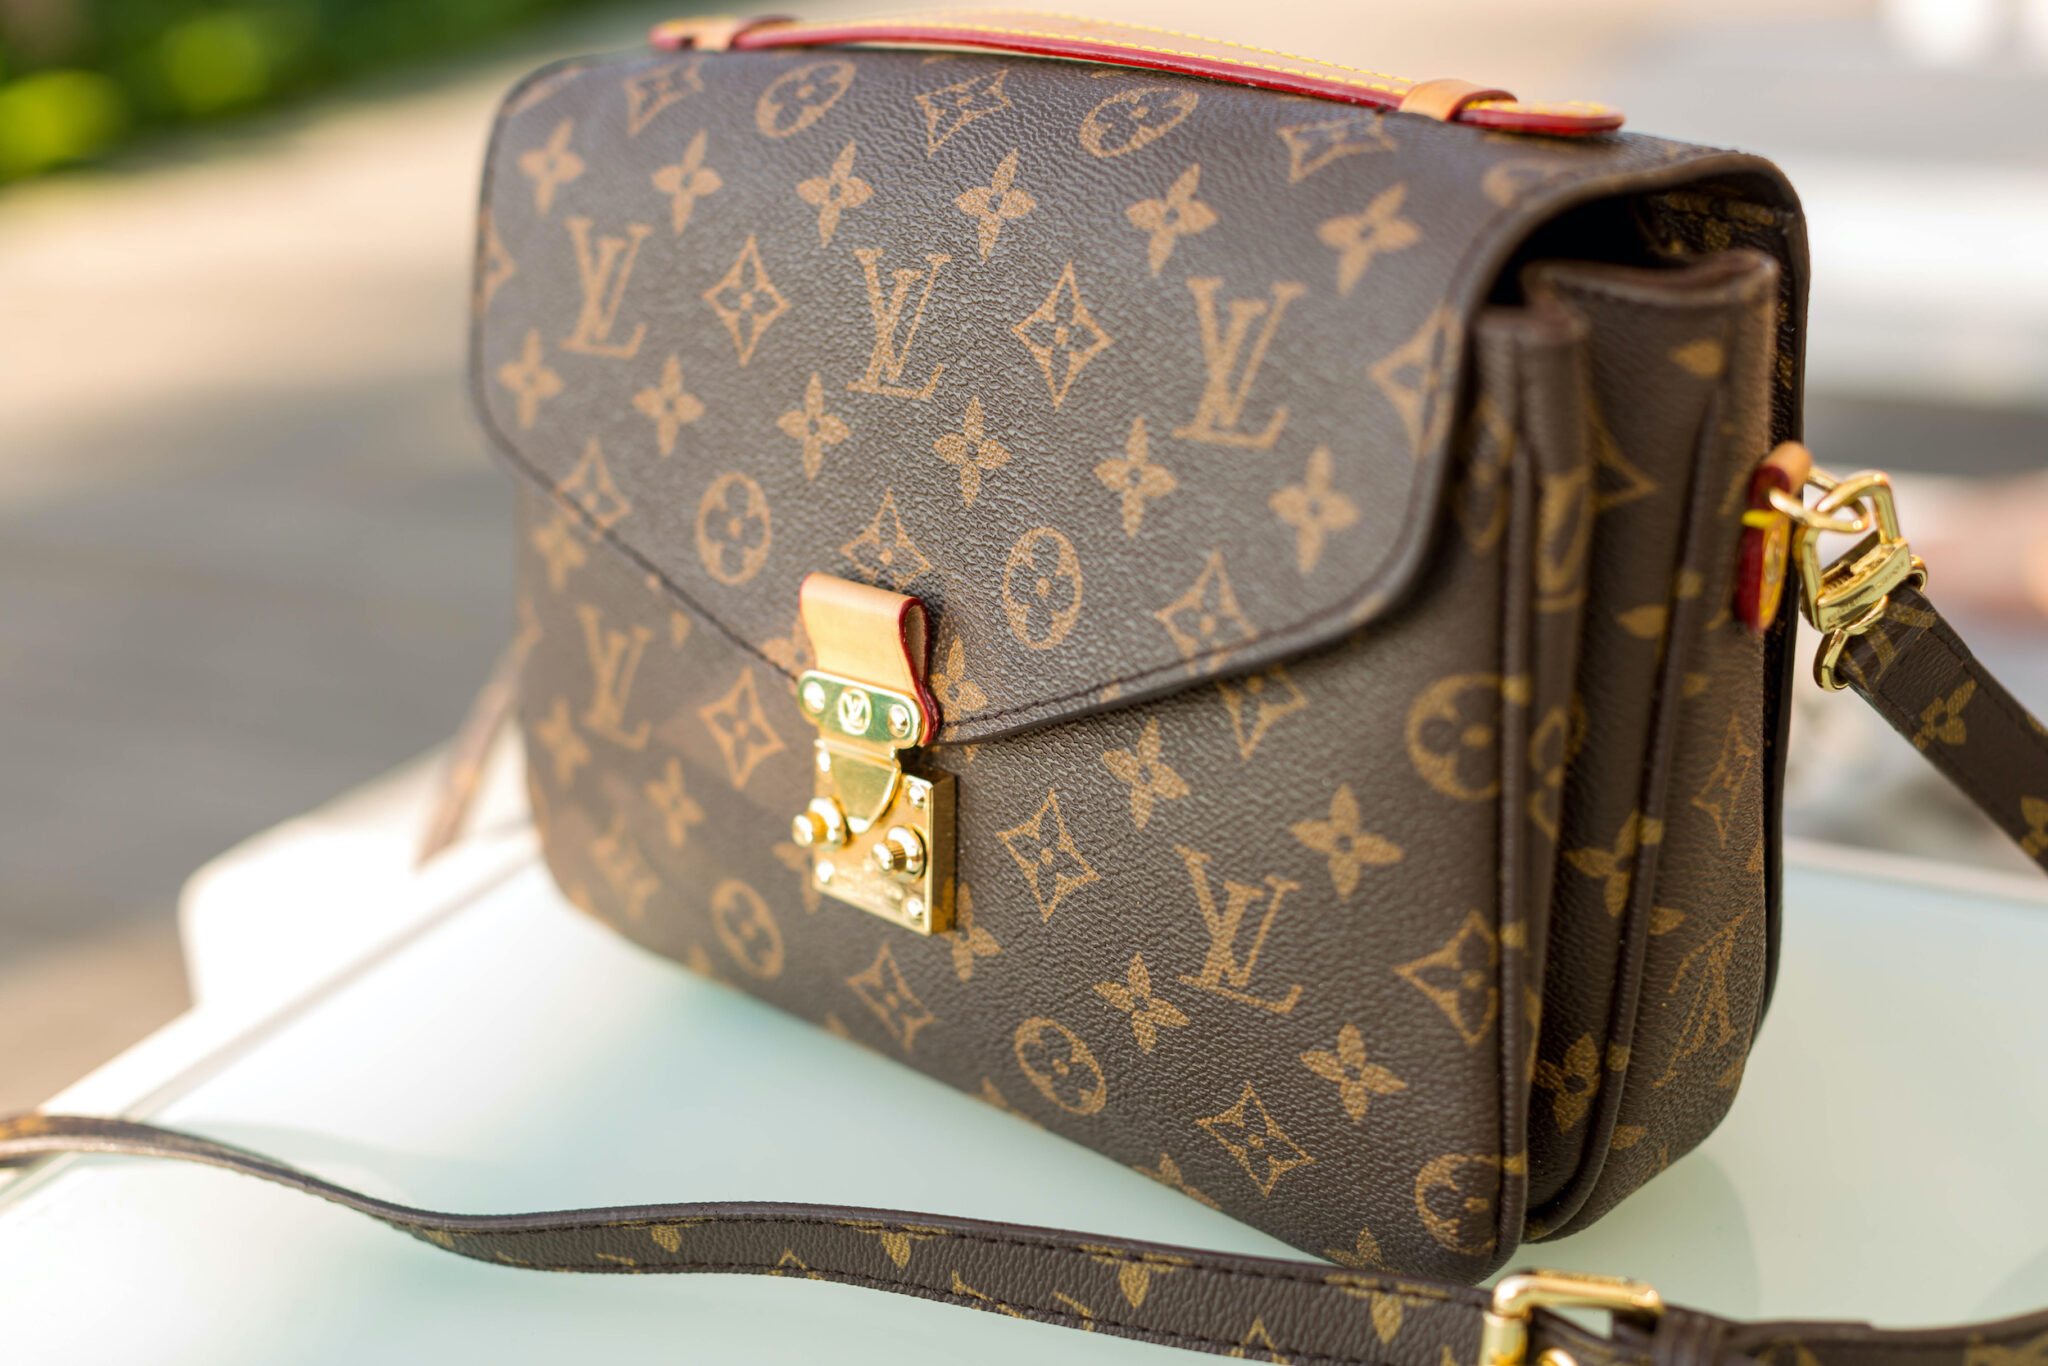 Is Louis Vuitton actually luxury?